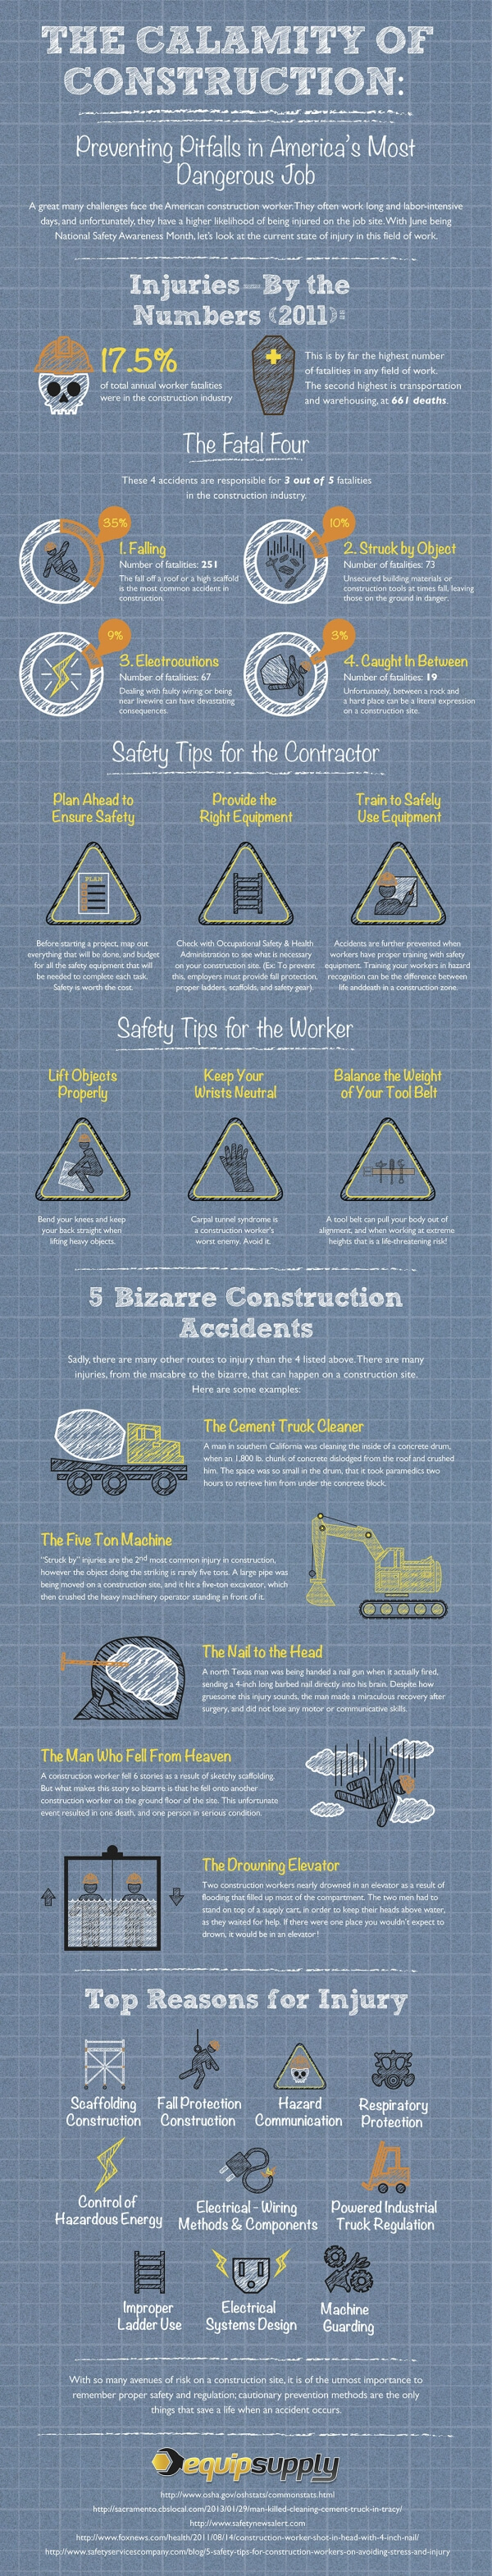 The Calamity of Construction infographic